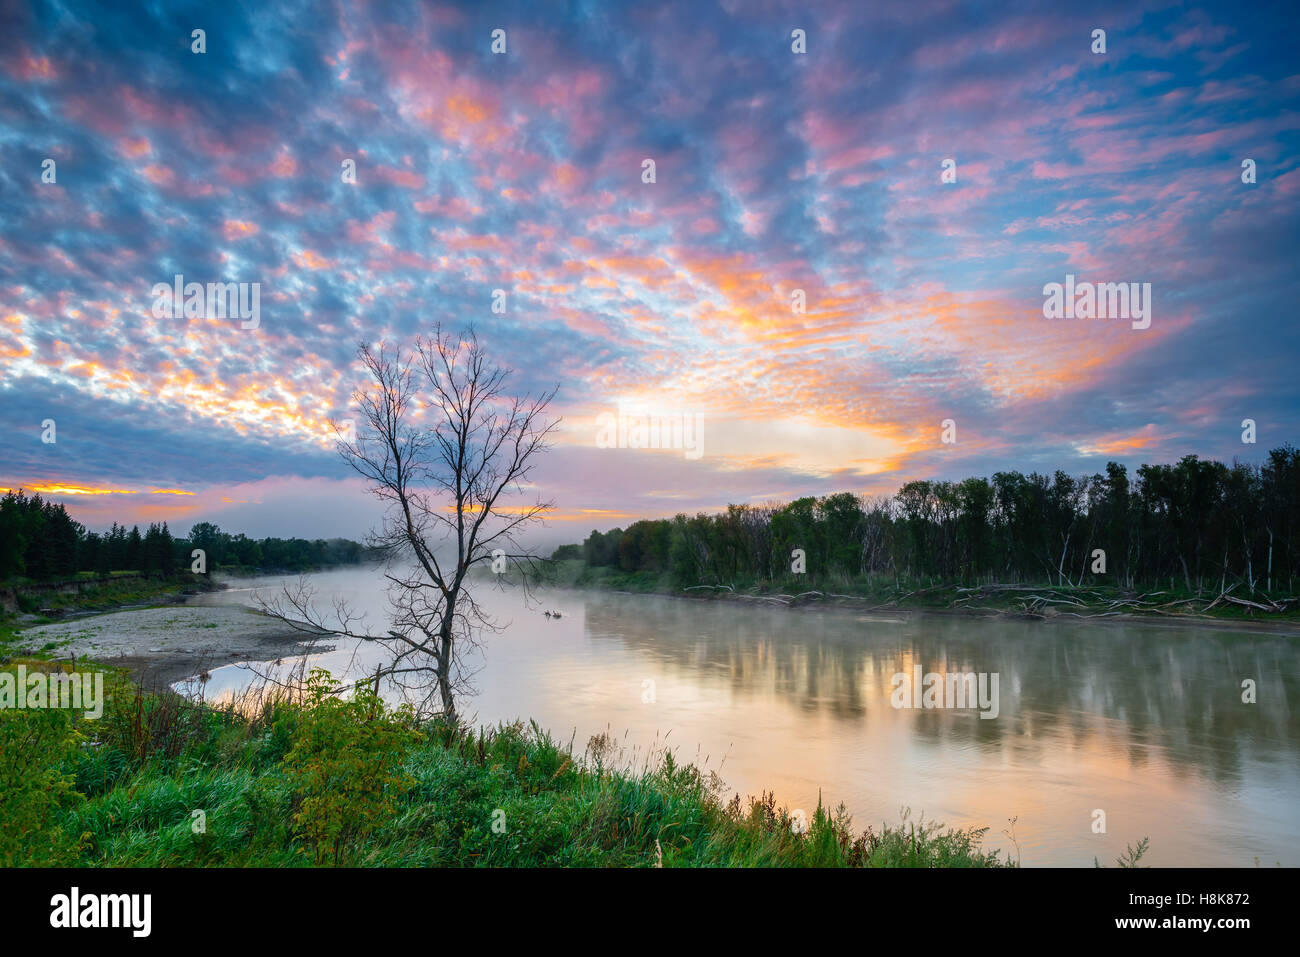 Sunrise over the Assiniboine River in Spruce Woods Provincial Park, Manitoba, Canada Stock Photo